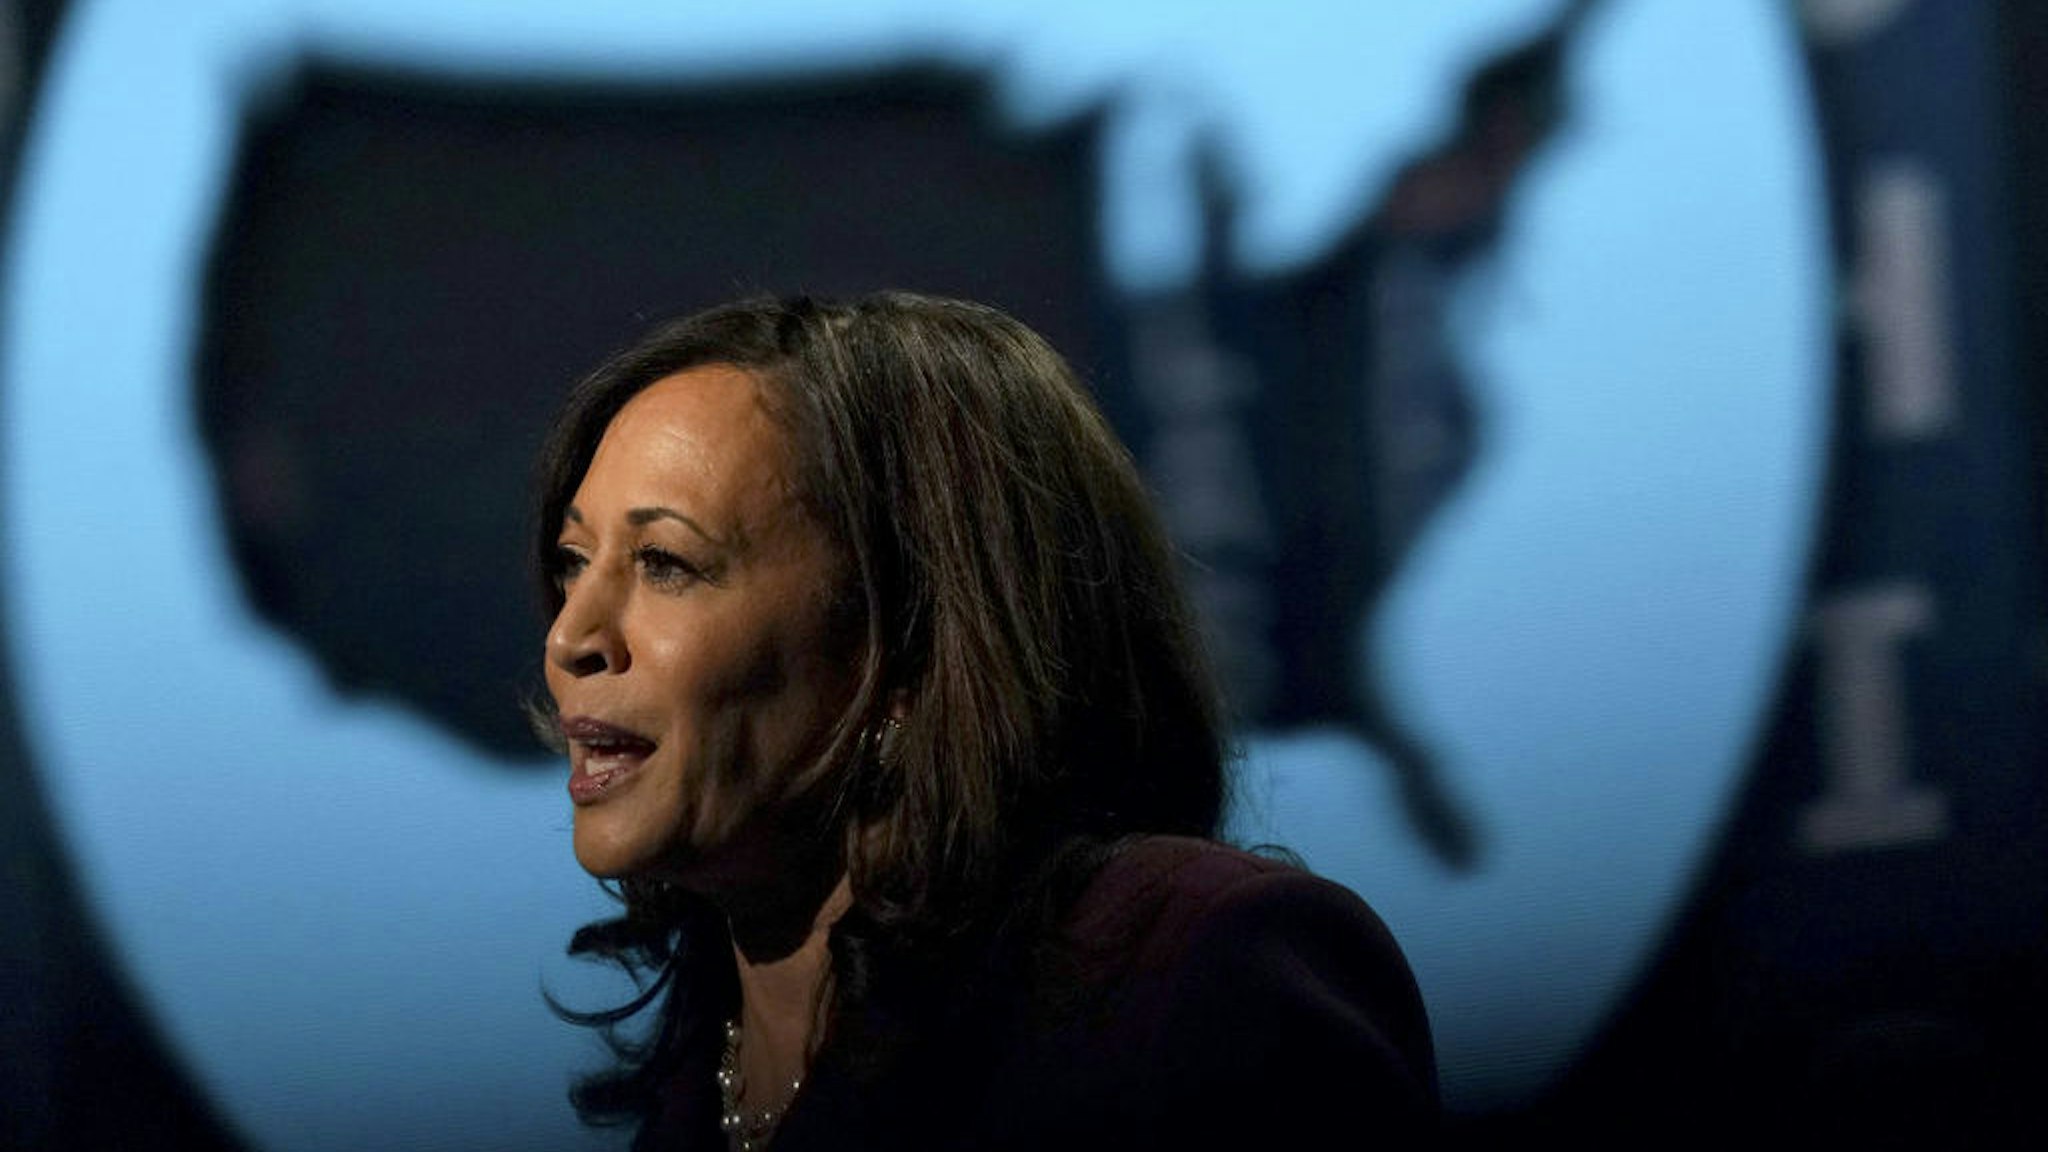 Senator Kamala Harris, Democratic vice presidential nominee, speaks during the Democratic National Convention at the Chase Center in Wilmington, Delaware, U.S., on Wednesday, Aug. 19, 2020. Harris's prime-time speech is the first glimpse of how Joe Biden's campaign plans to deploy a history-making vice presidential nominee for a campaign that has largely been grounded by the coronavirus. Photographer: Stefani Reynolds/Bloomberg